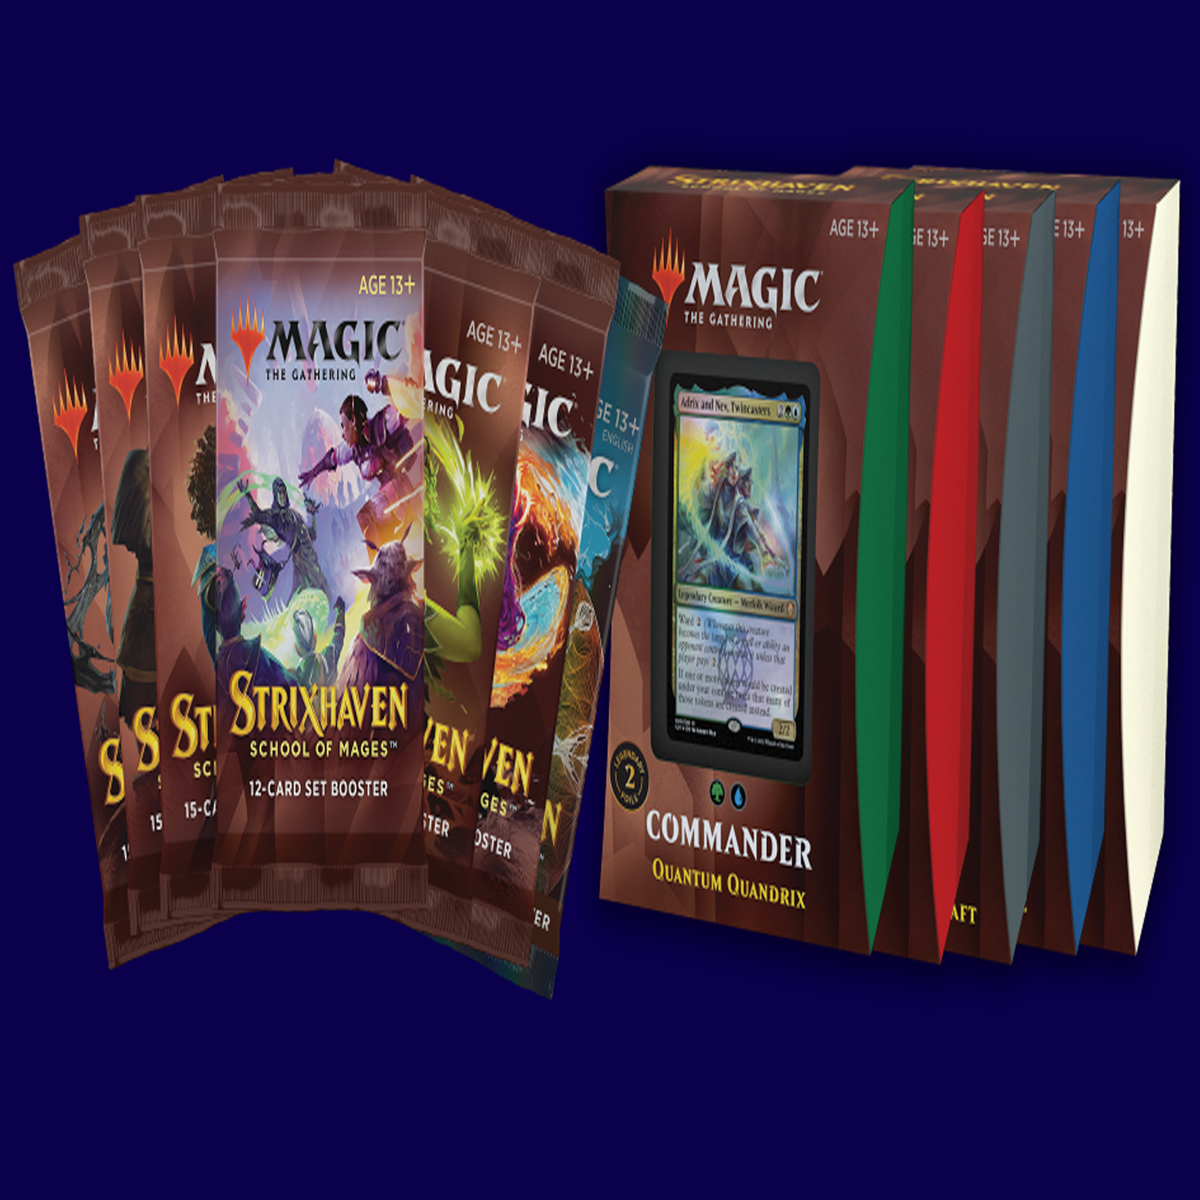 Win a Commander deck and set boosters for Magic: The Gathering 